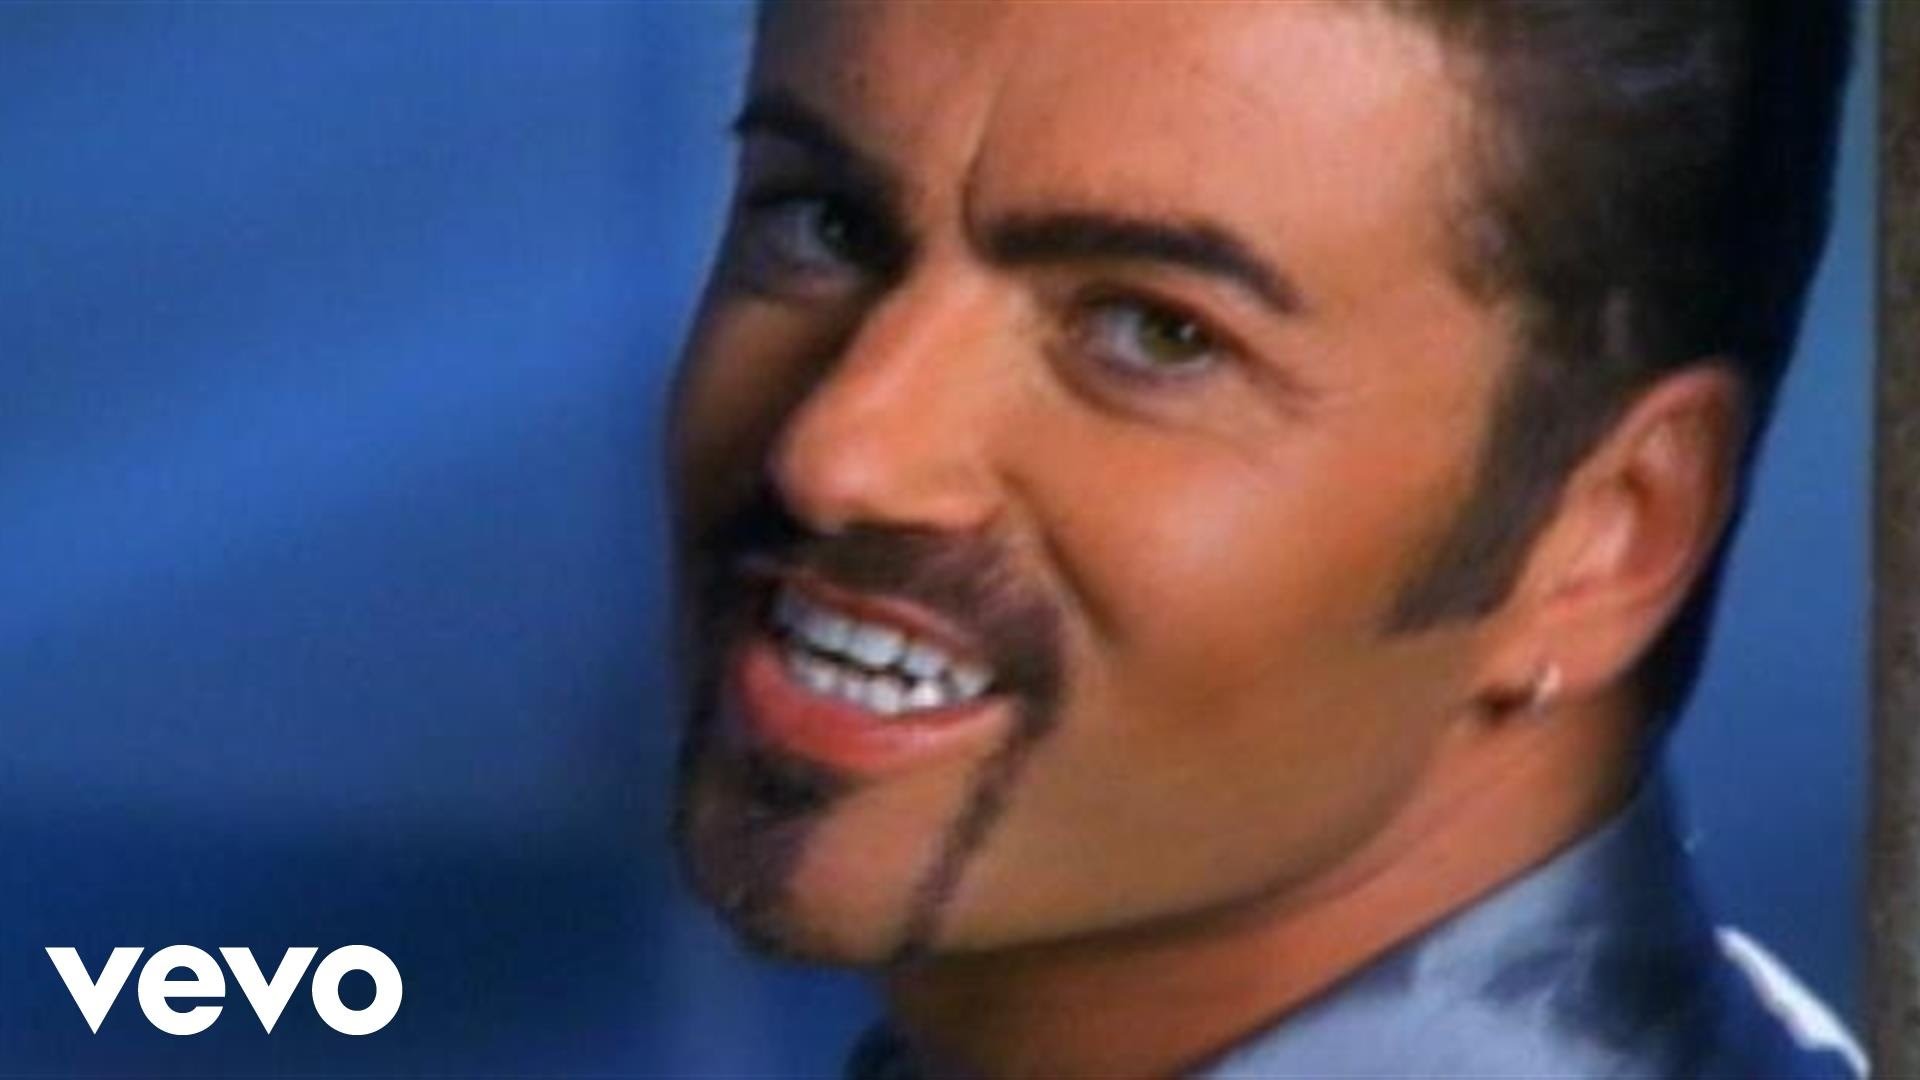 1920x1080 George Michael's official music video for 'Outside'.